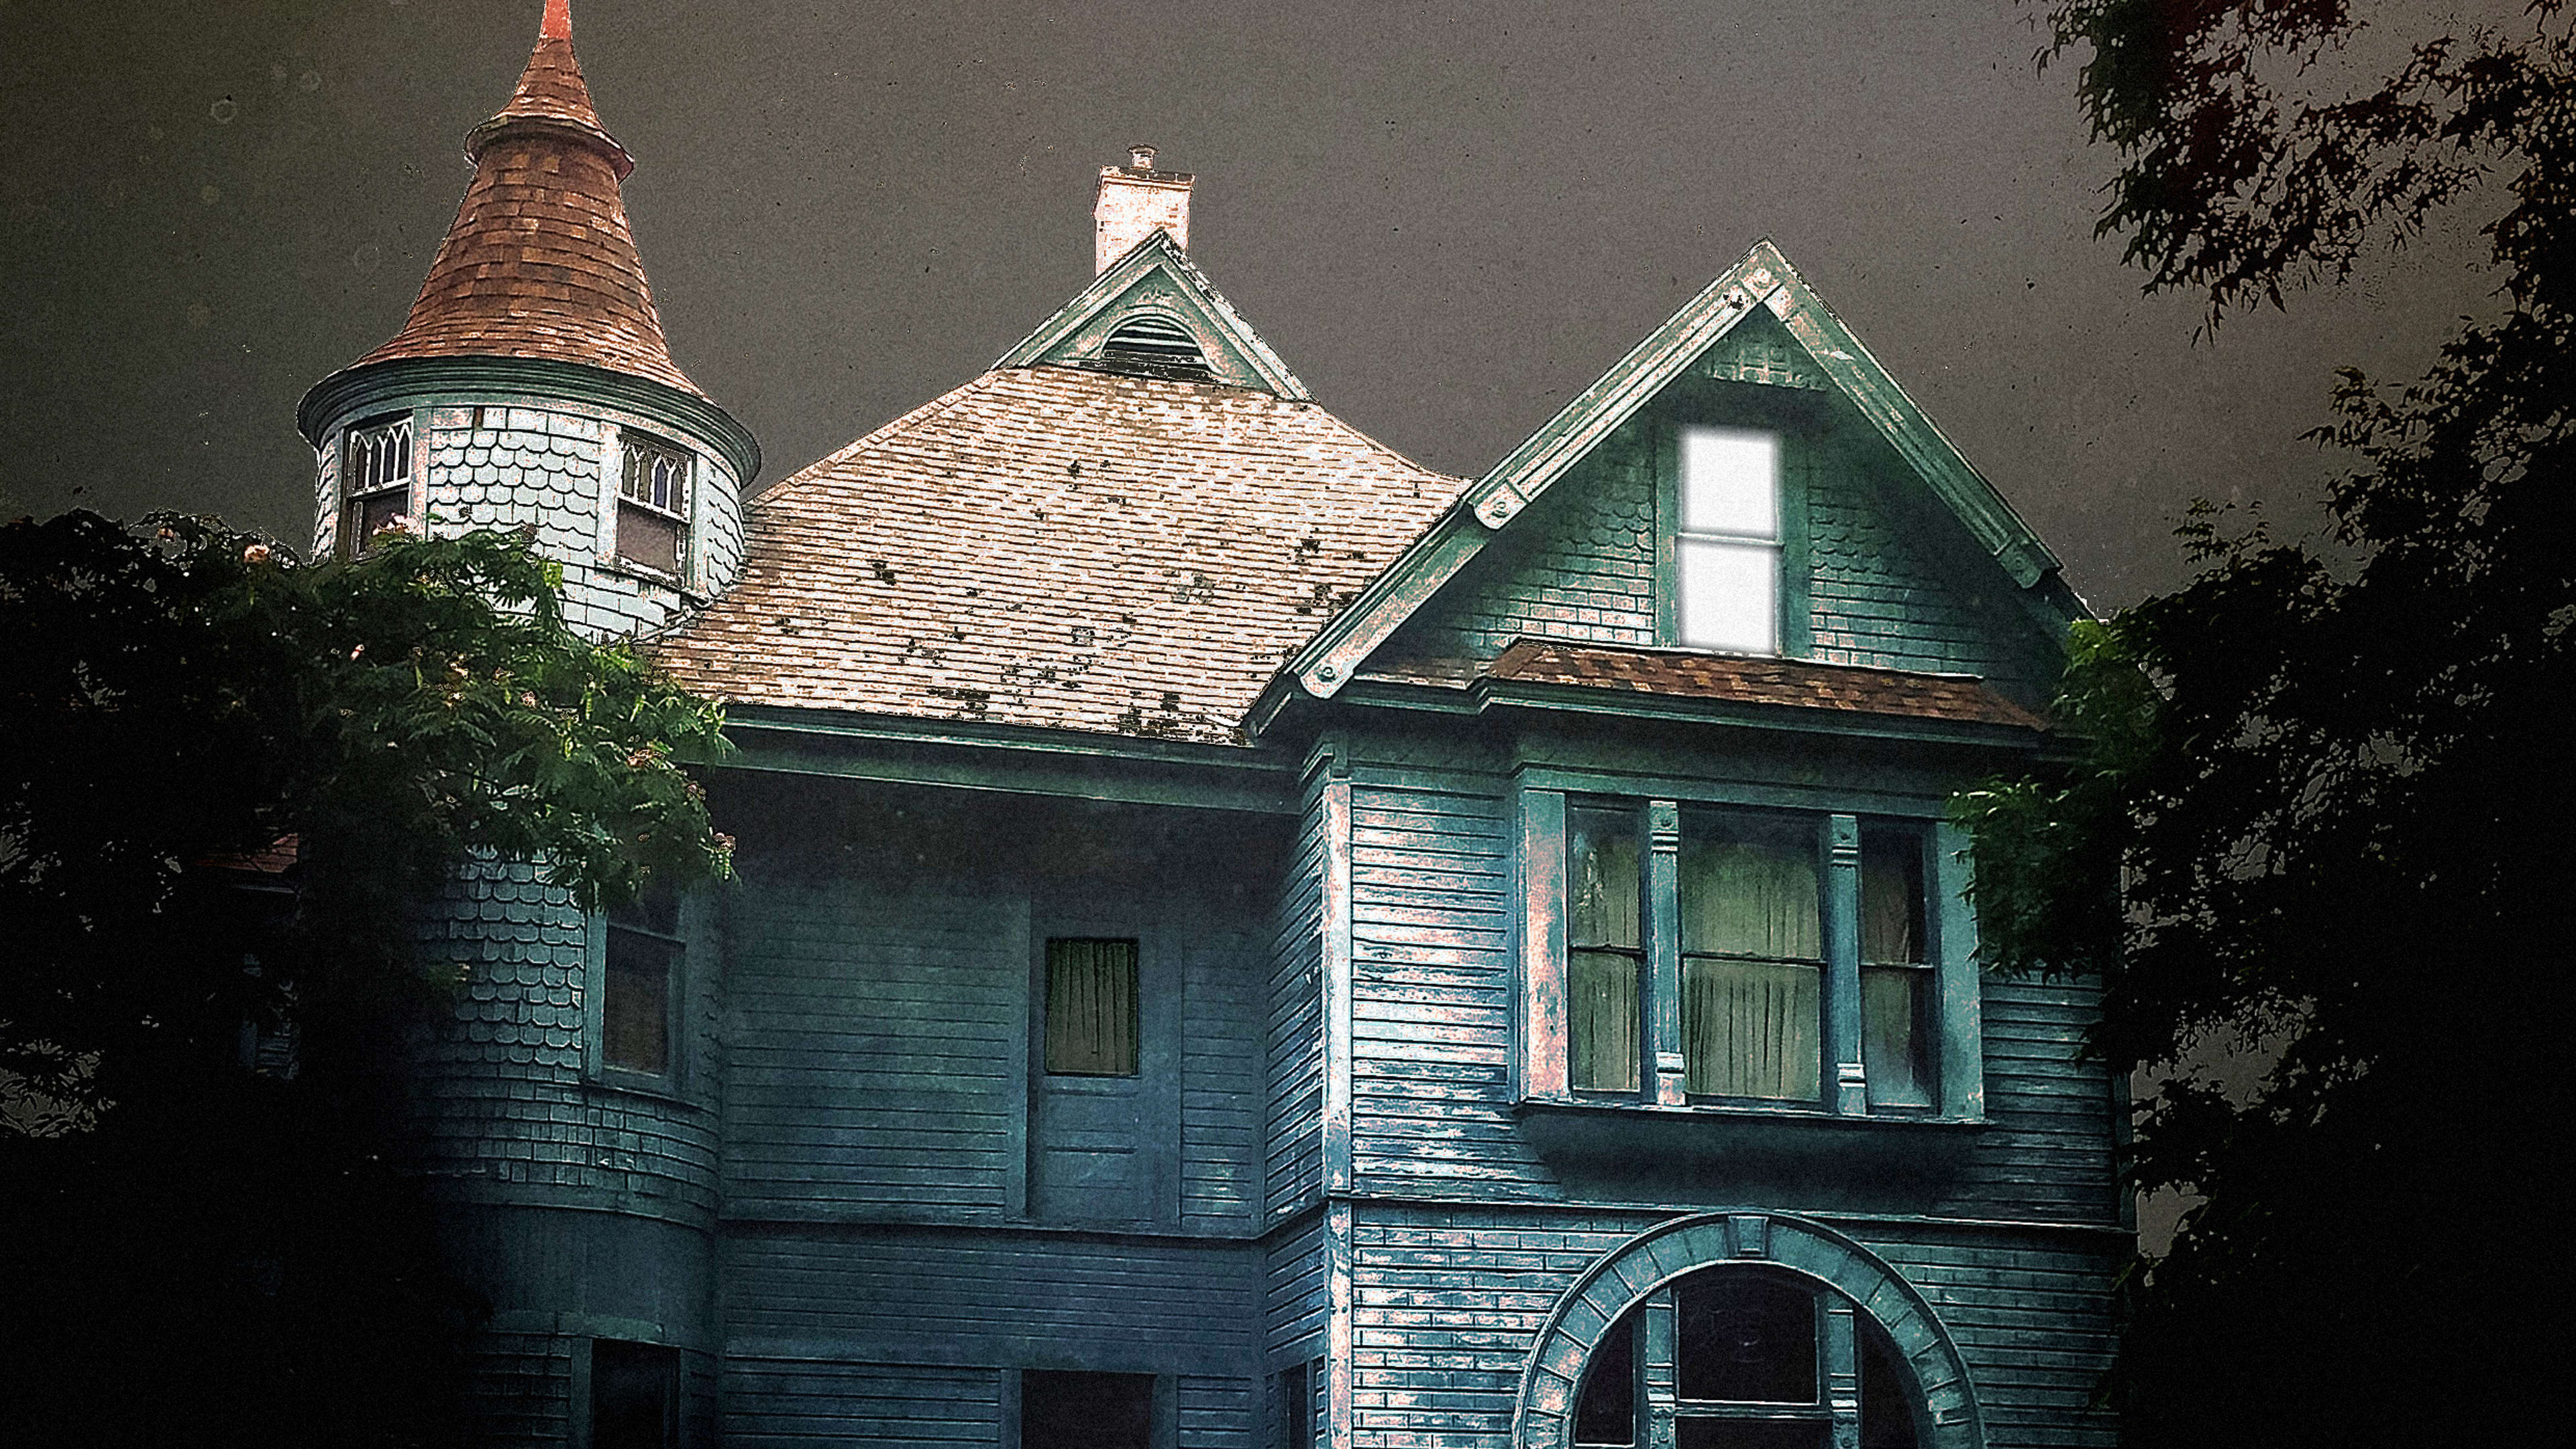 A psychologist explains why haunted houses terrify us